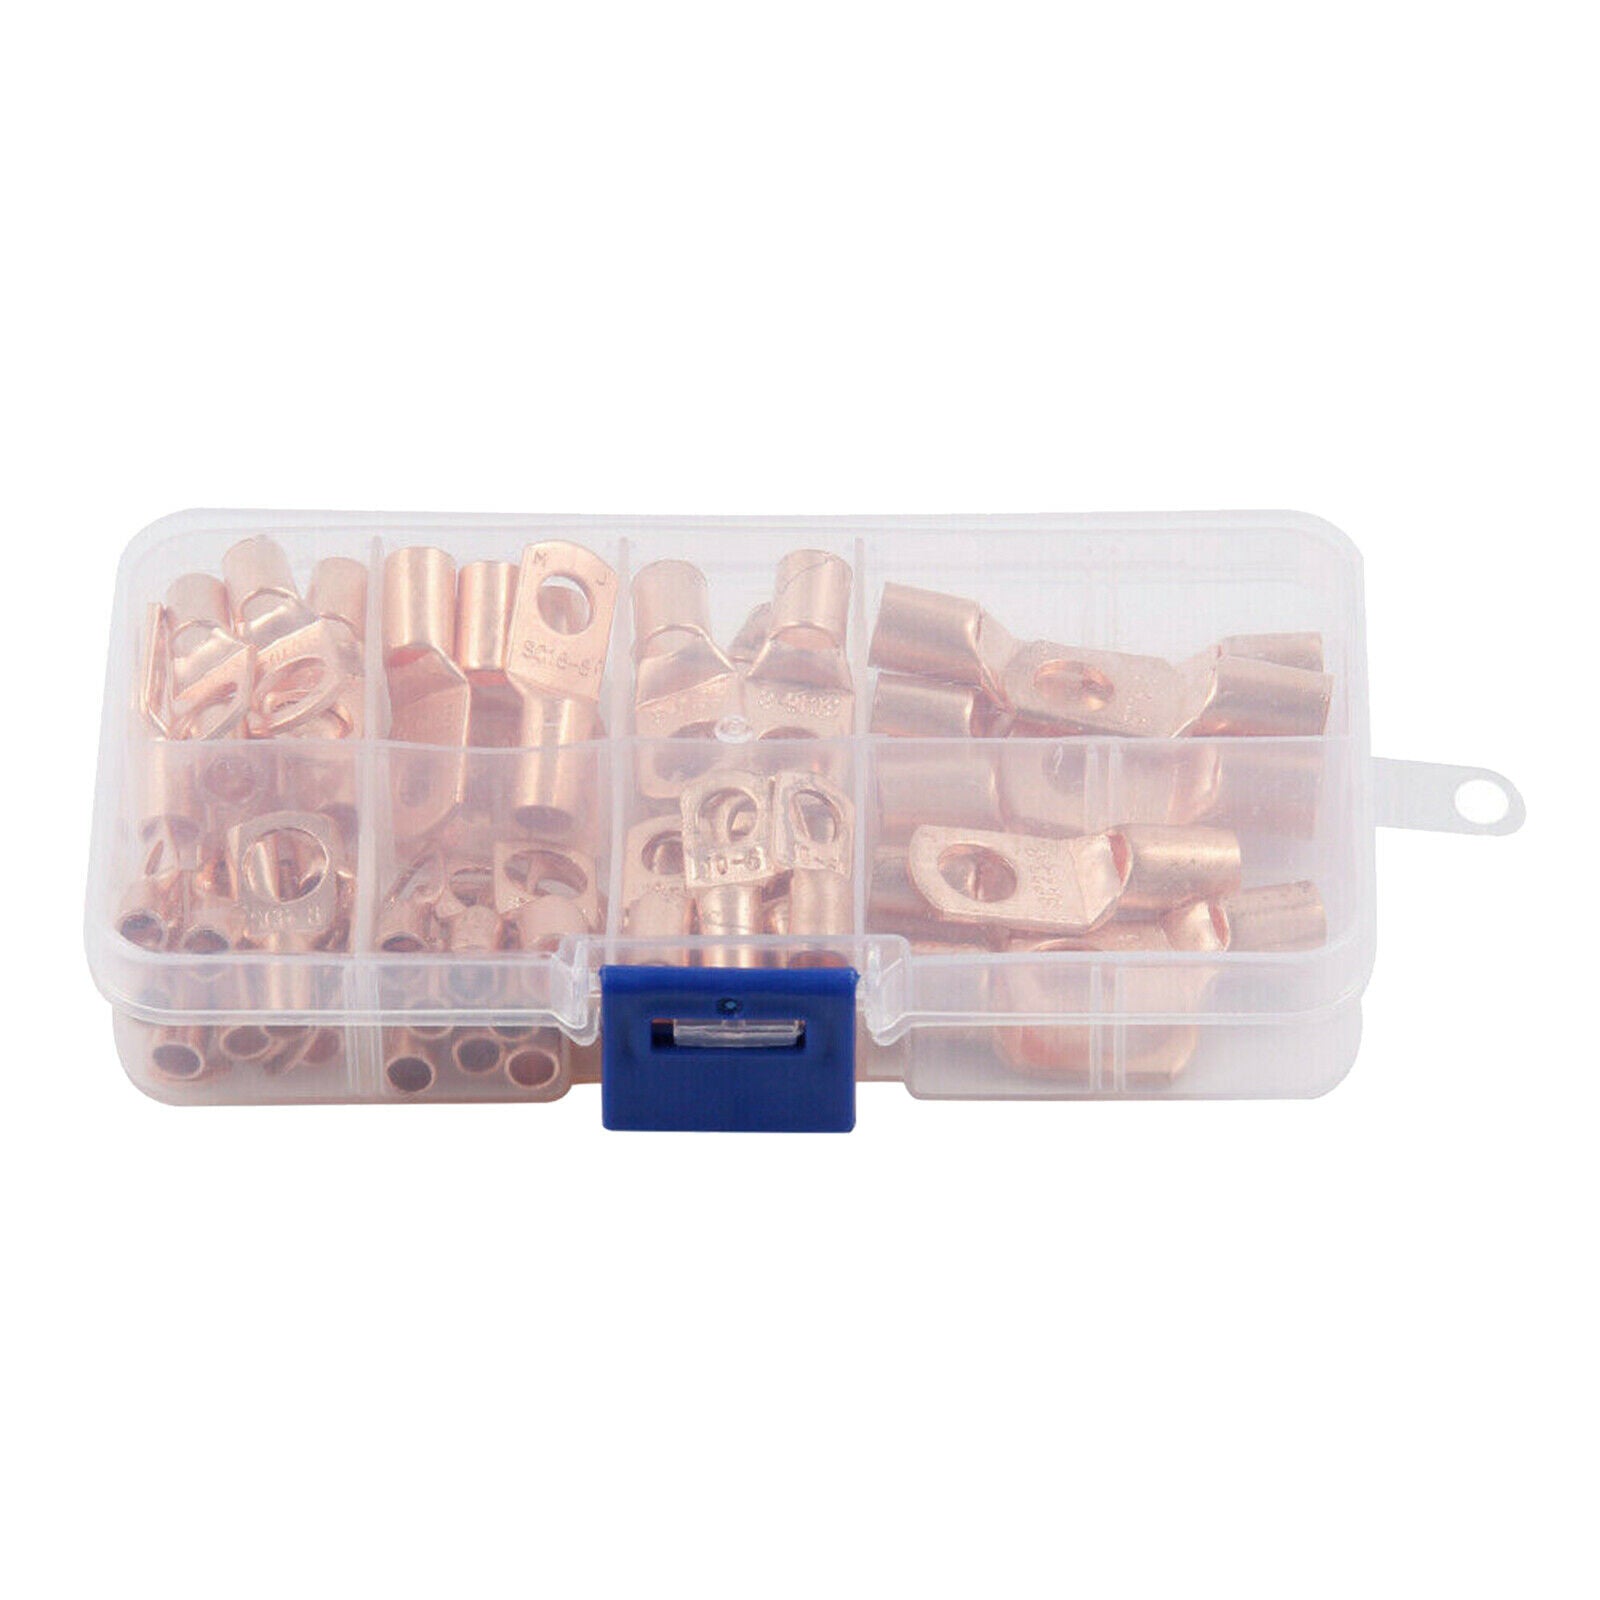 Lot 60 Copper Bare Cable Crimped/Soldered SC Terminals Ring Kit with Storage Box